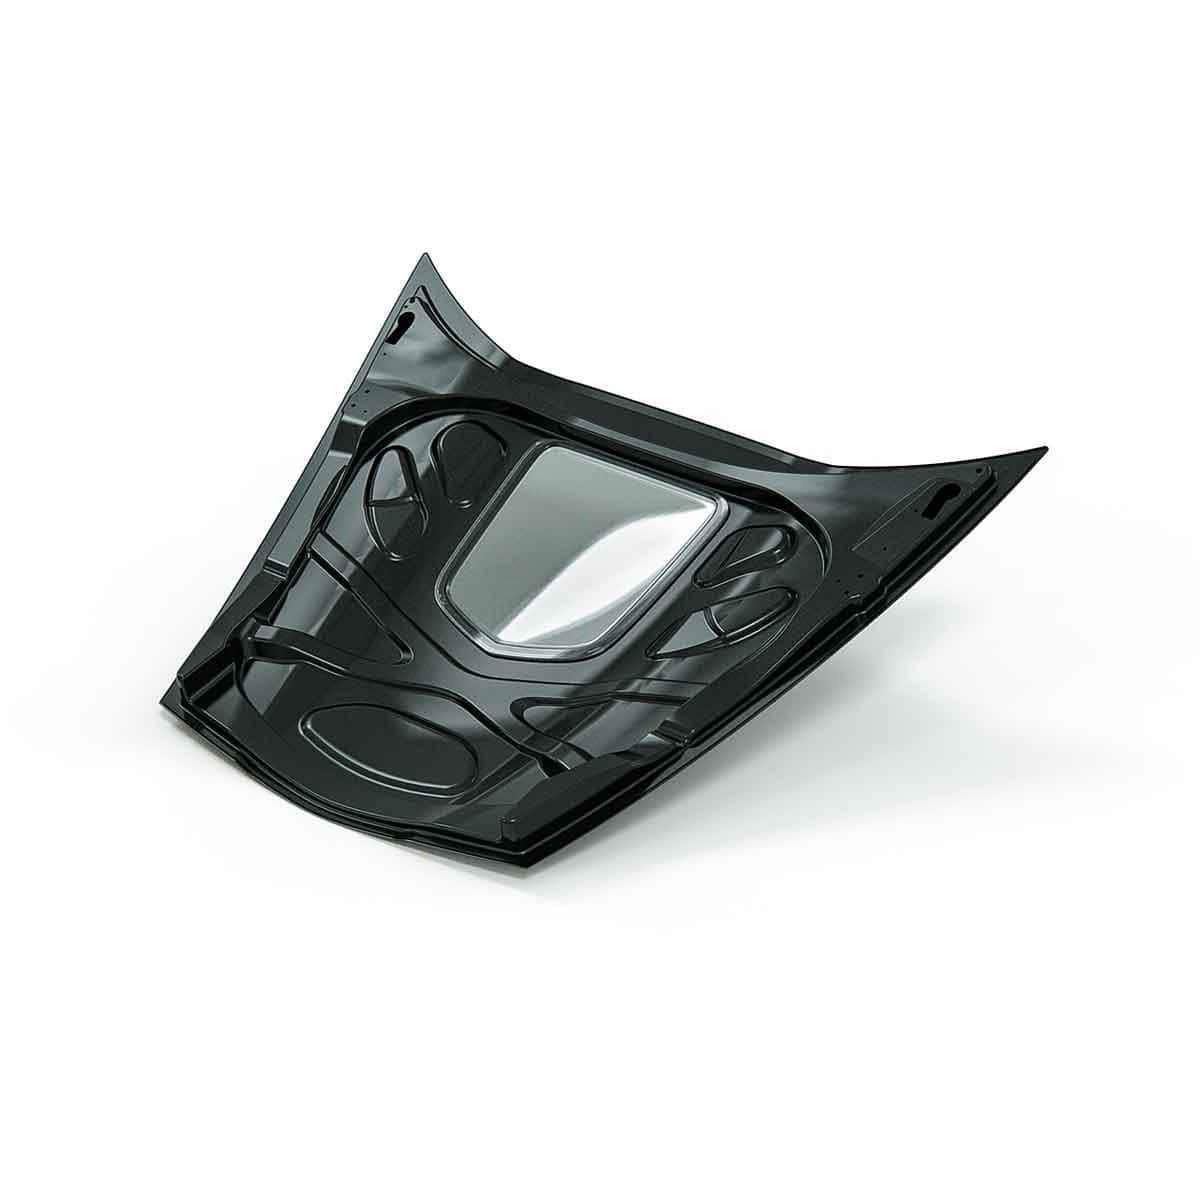 C6 ZR1 Hood with Polycarbonate Window and Window Insert - ACS Composite 27-4-003 PRM 27-4-013 Hood